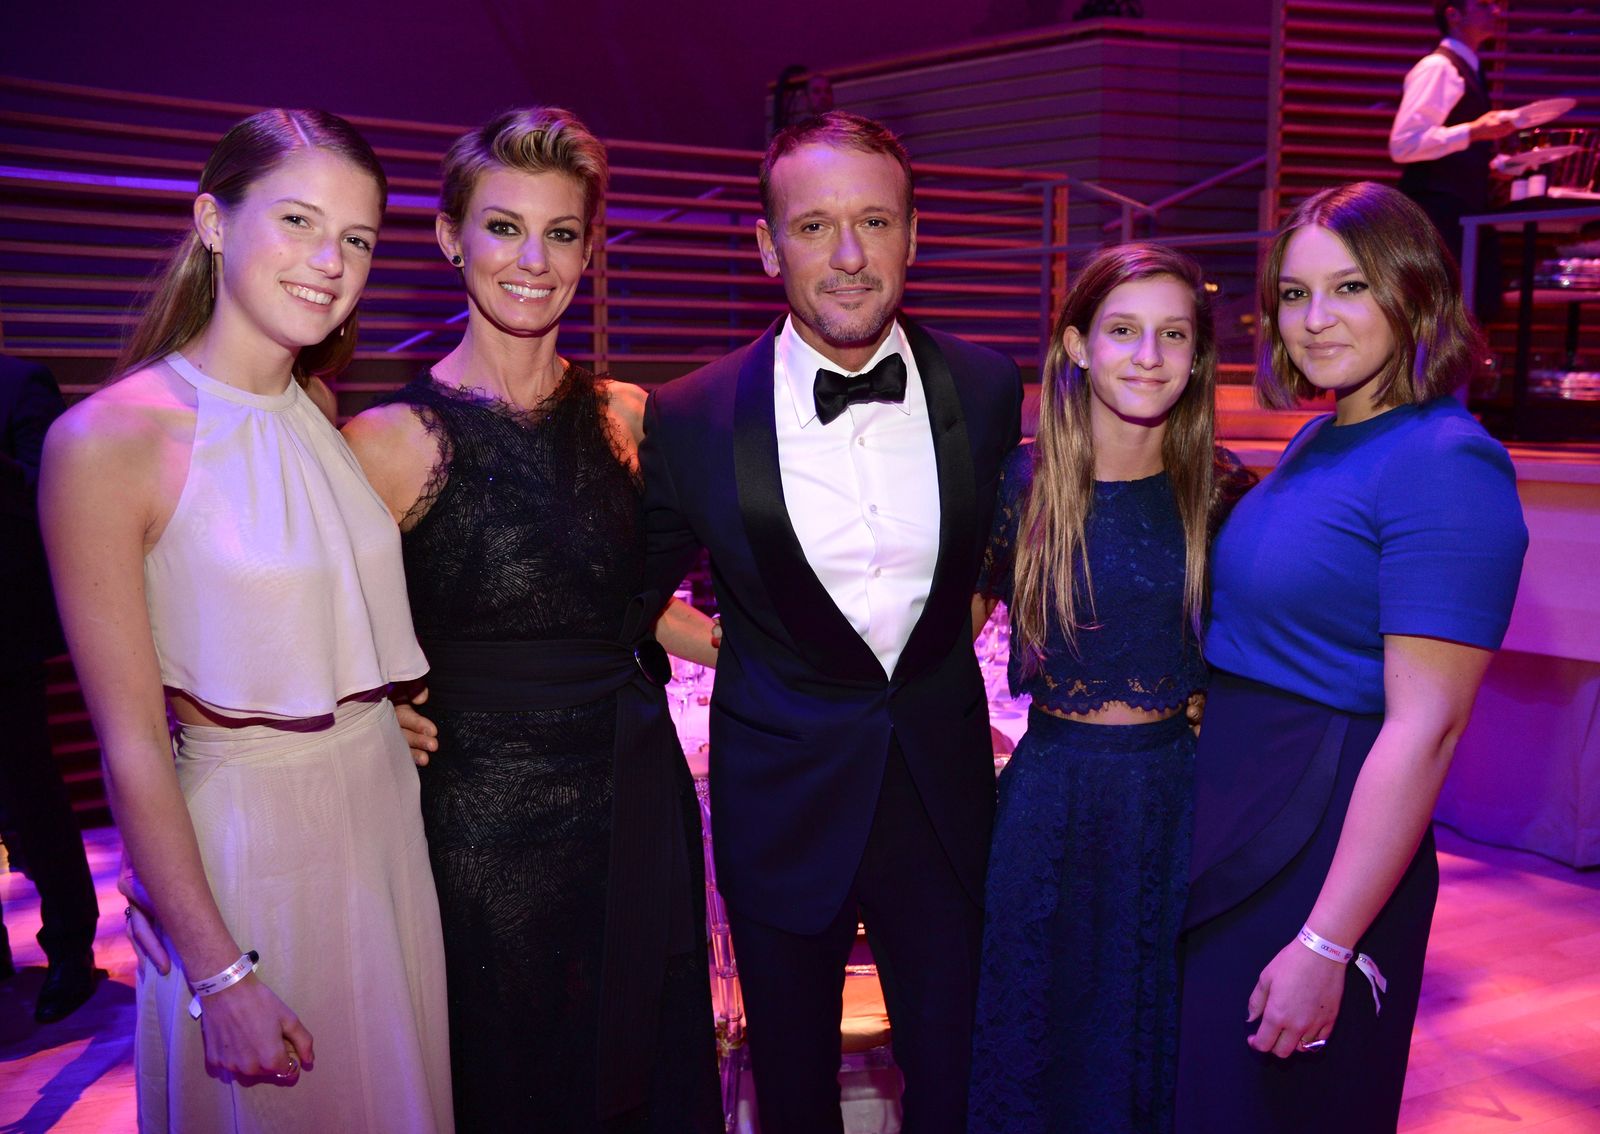 Gracie McGraw, Faith Hill, Tim McGraw, Audrey McGraw and Maggie McGraw at TIME 100 Gala on April 21, 2015. | Photo: Getty Images